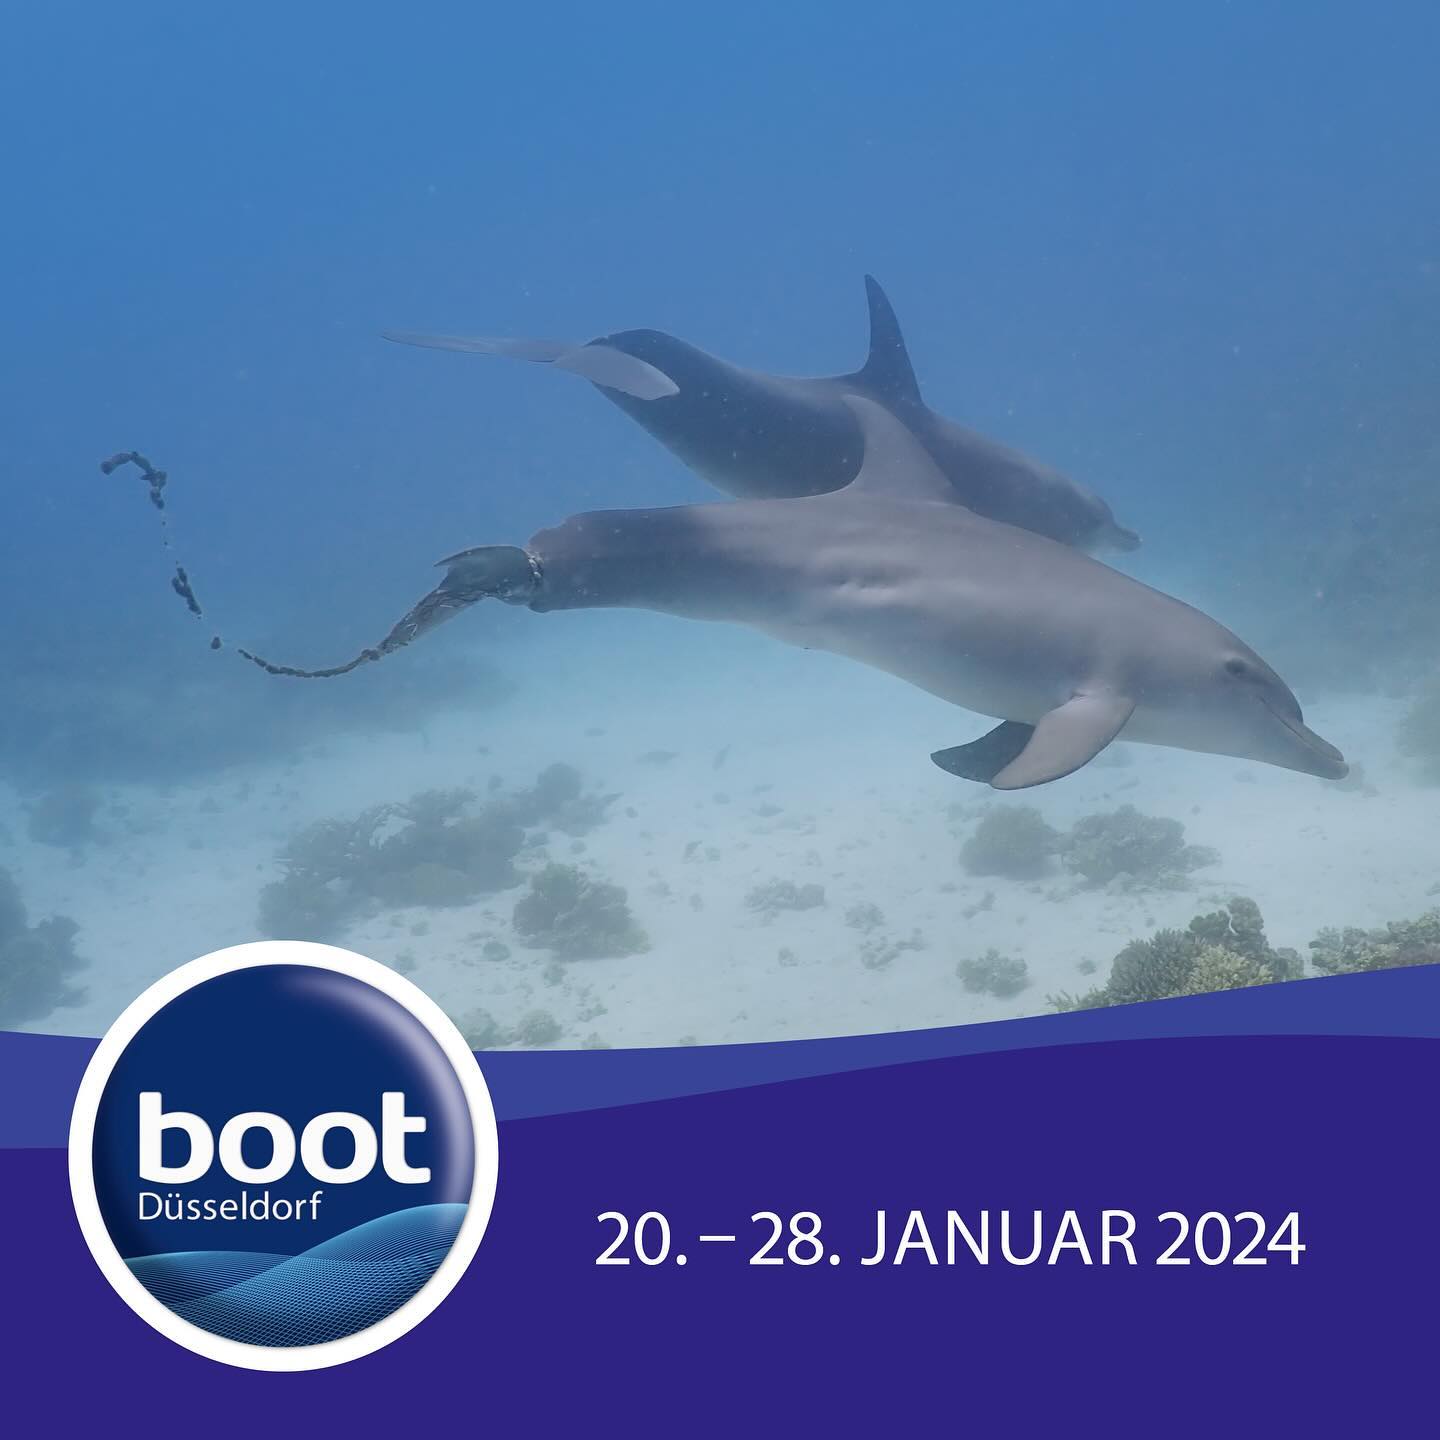 Come and visit us at this year’s Boot Düsseldorf, January 20 – 28, 2024!
Our president, Angela Ziltener, will hold...